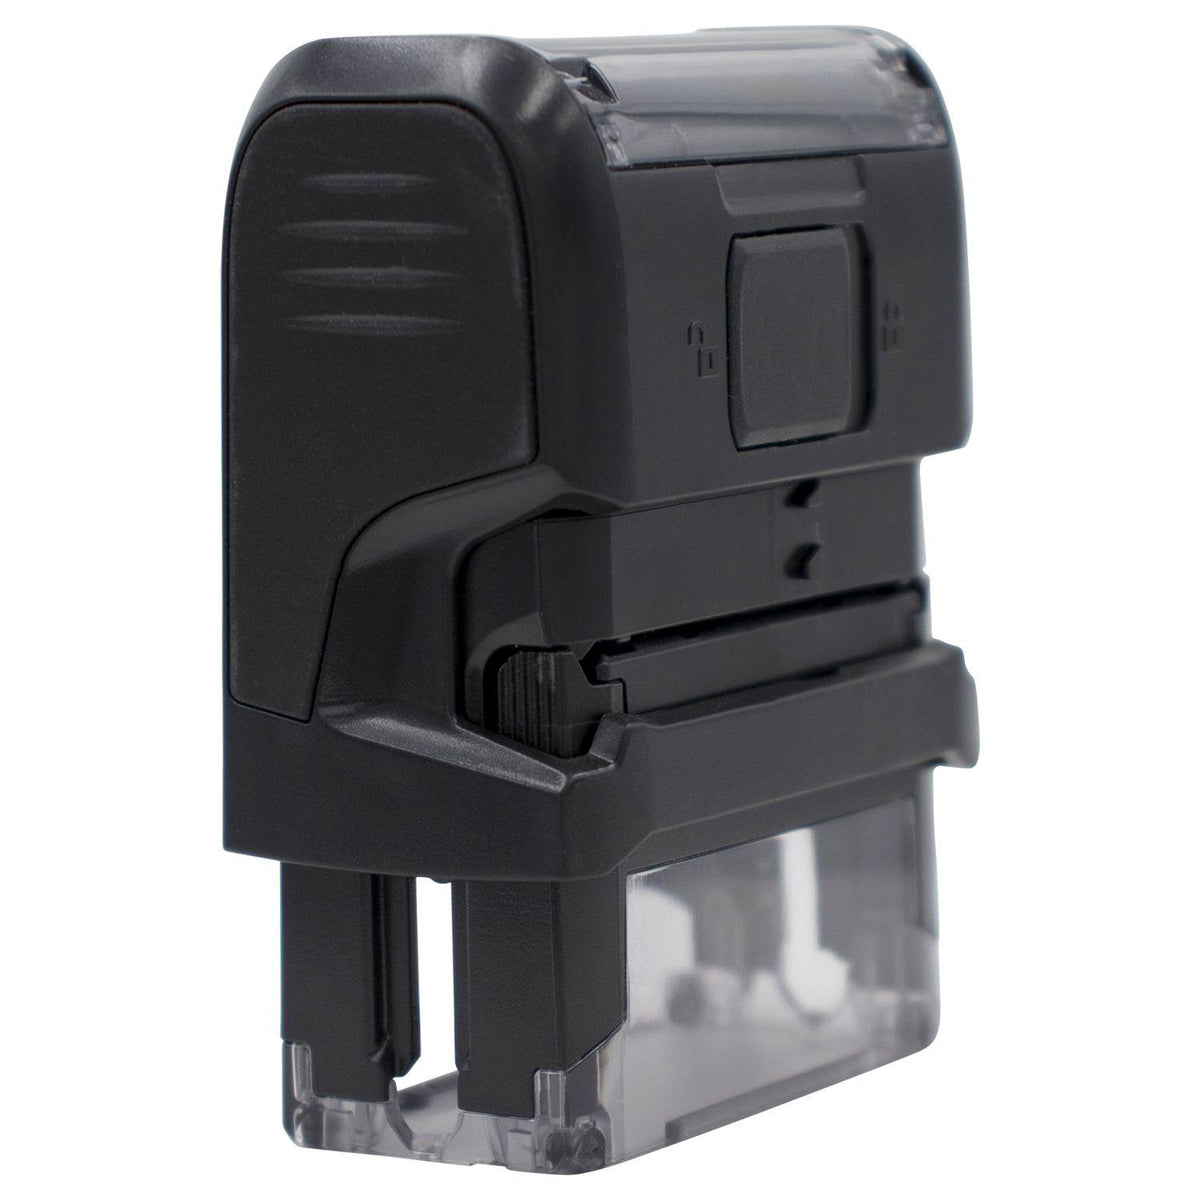 Large Self Inking Certified Copy Stamp Back View